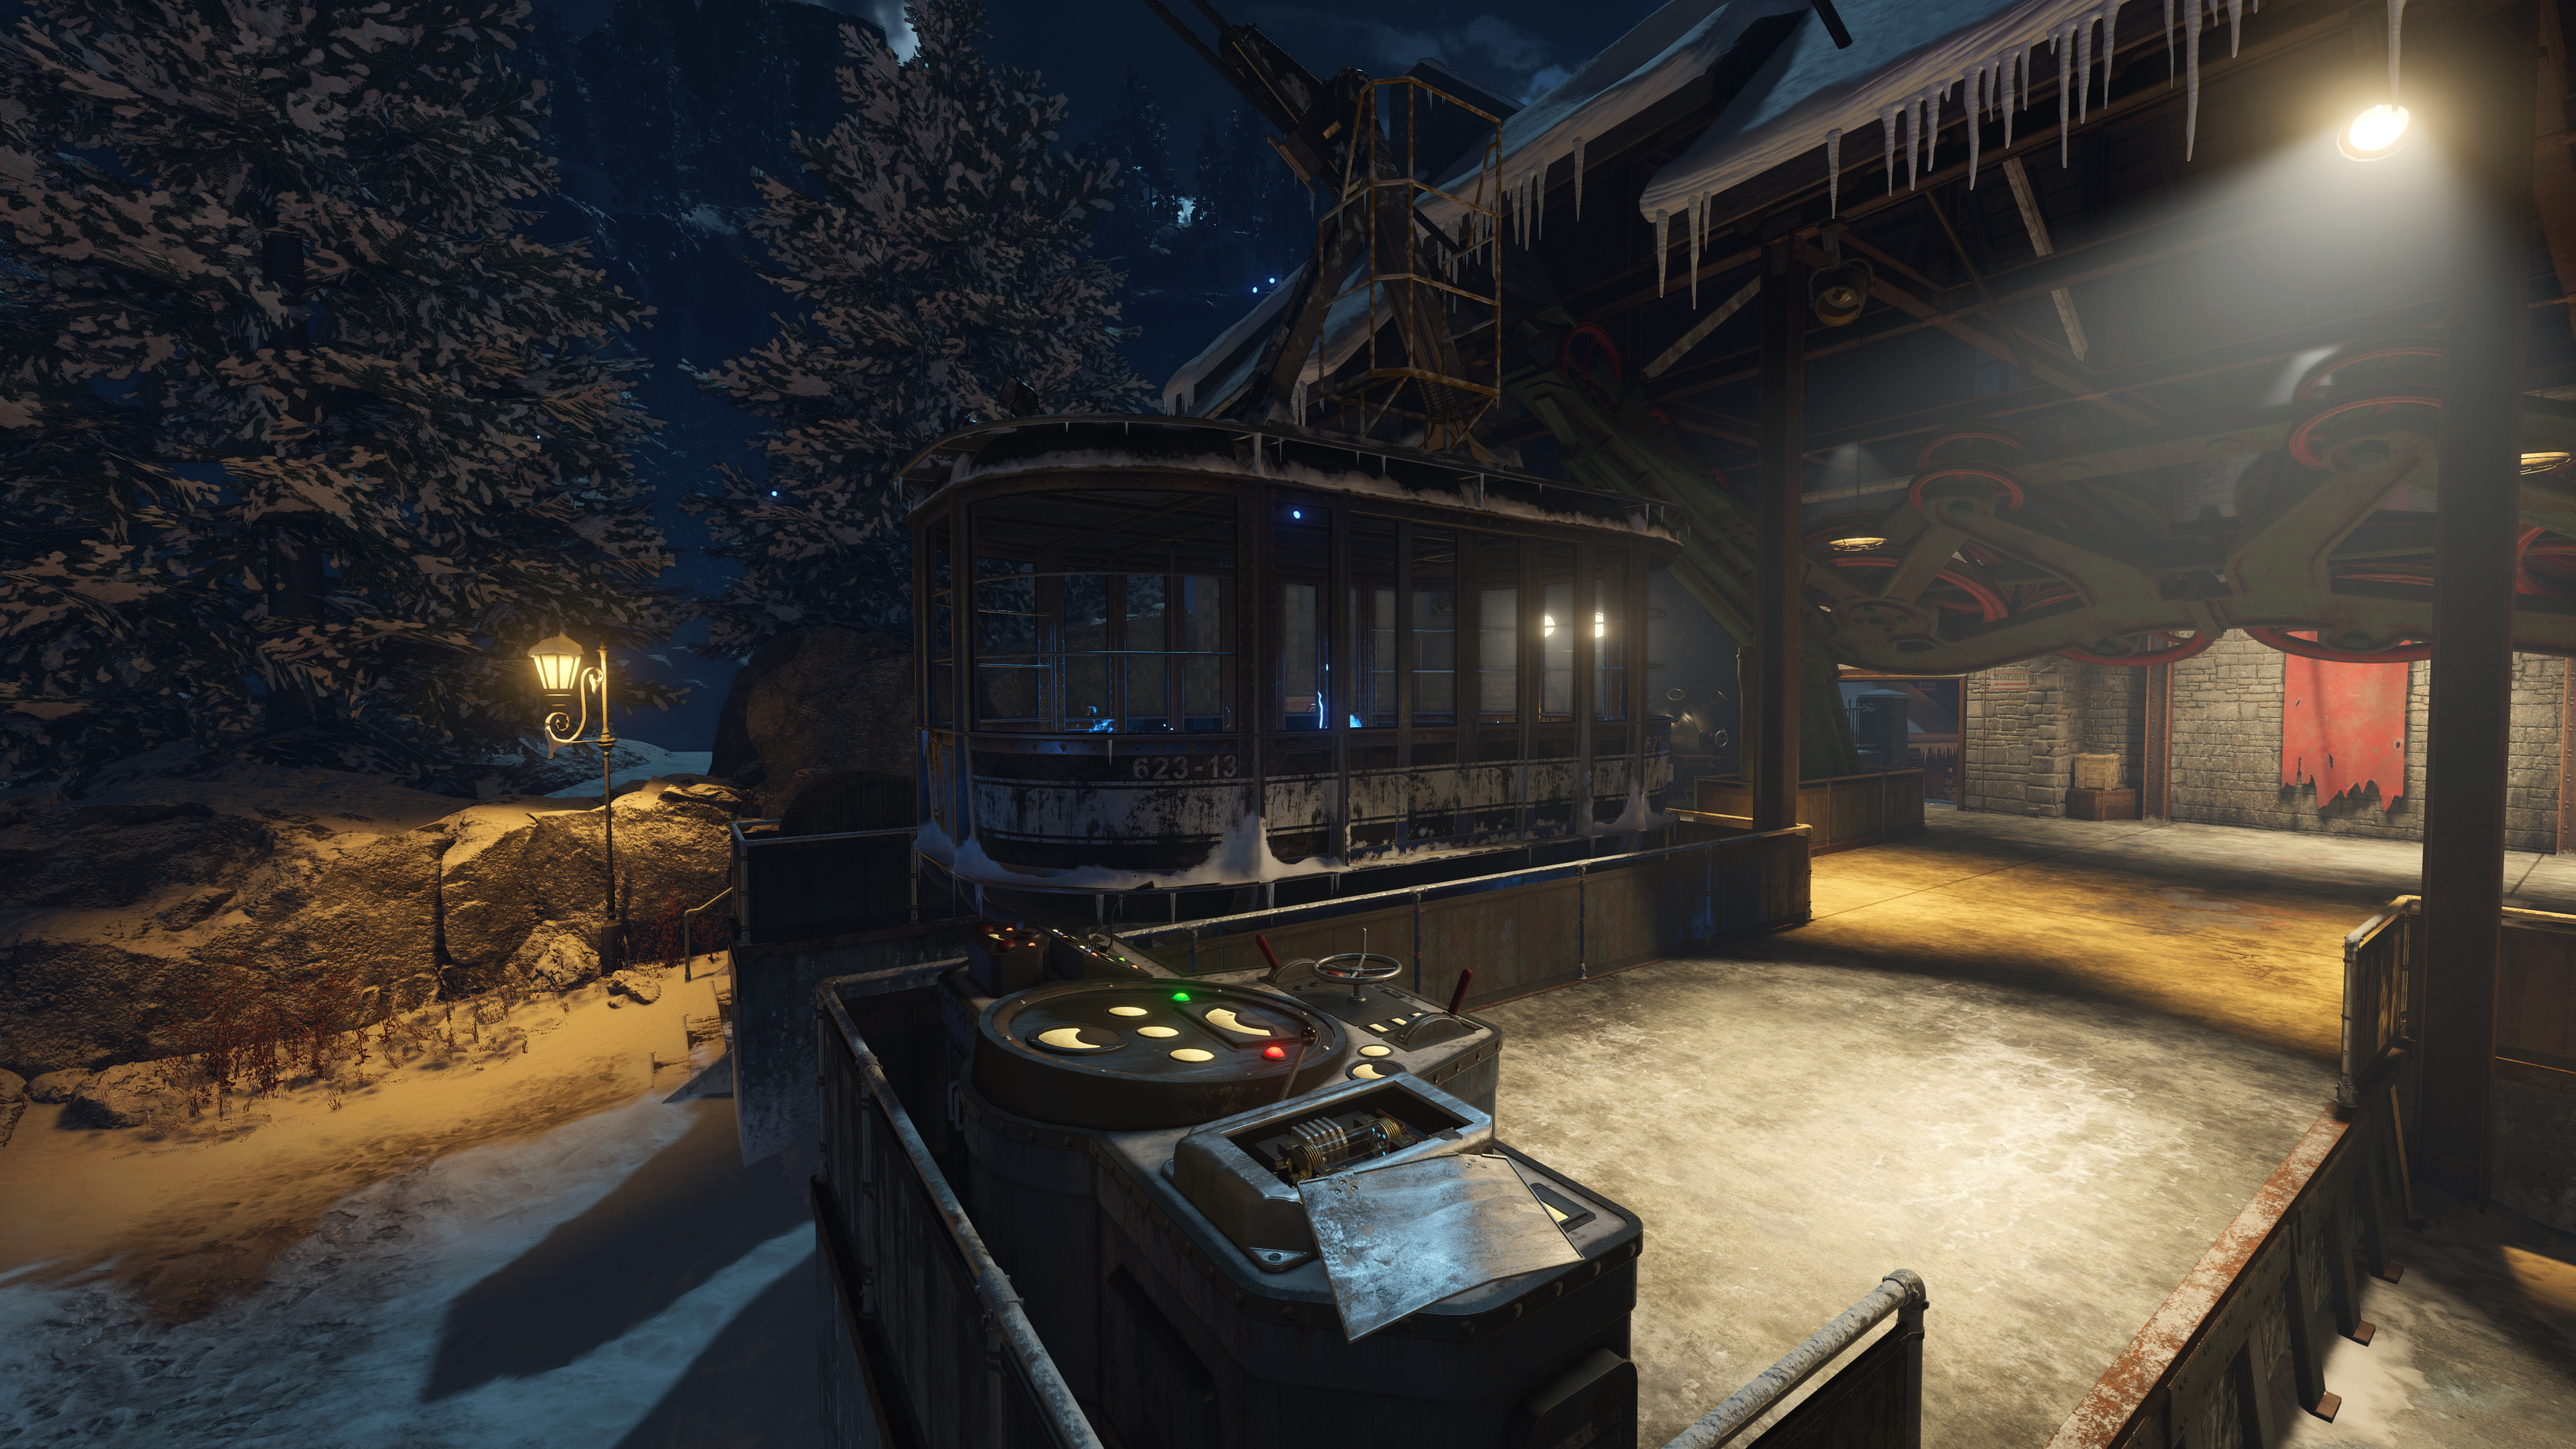 The sky tram and control console are zombie assets from BO3 that I authored in addition to lighting.